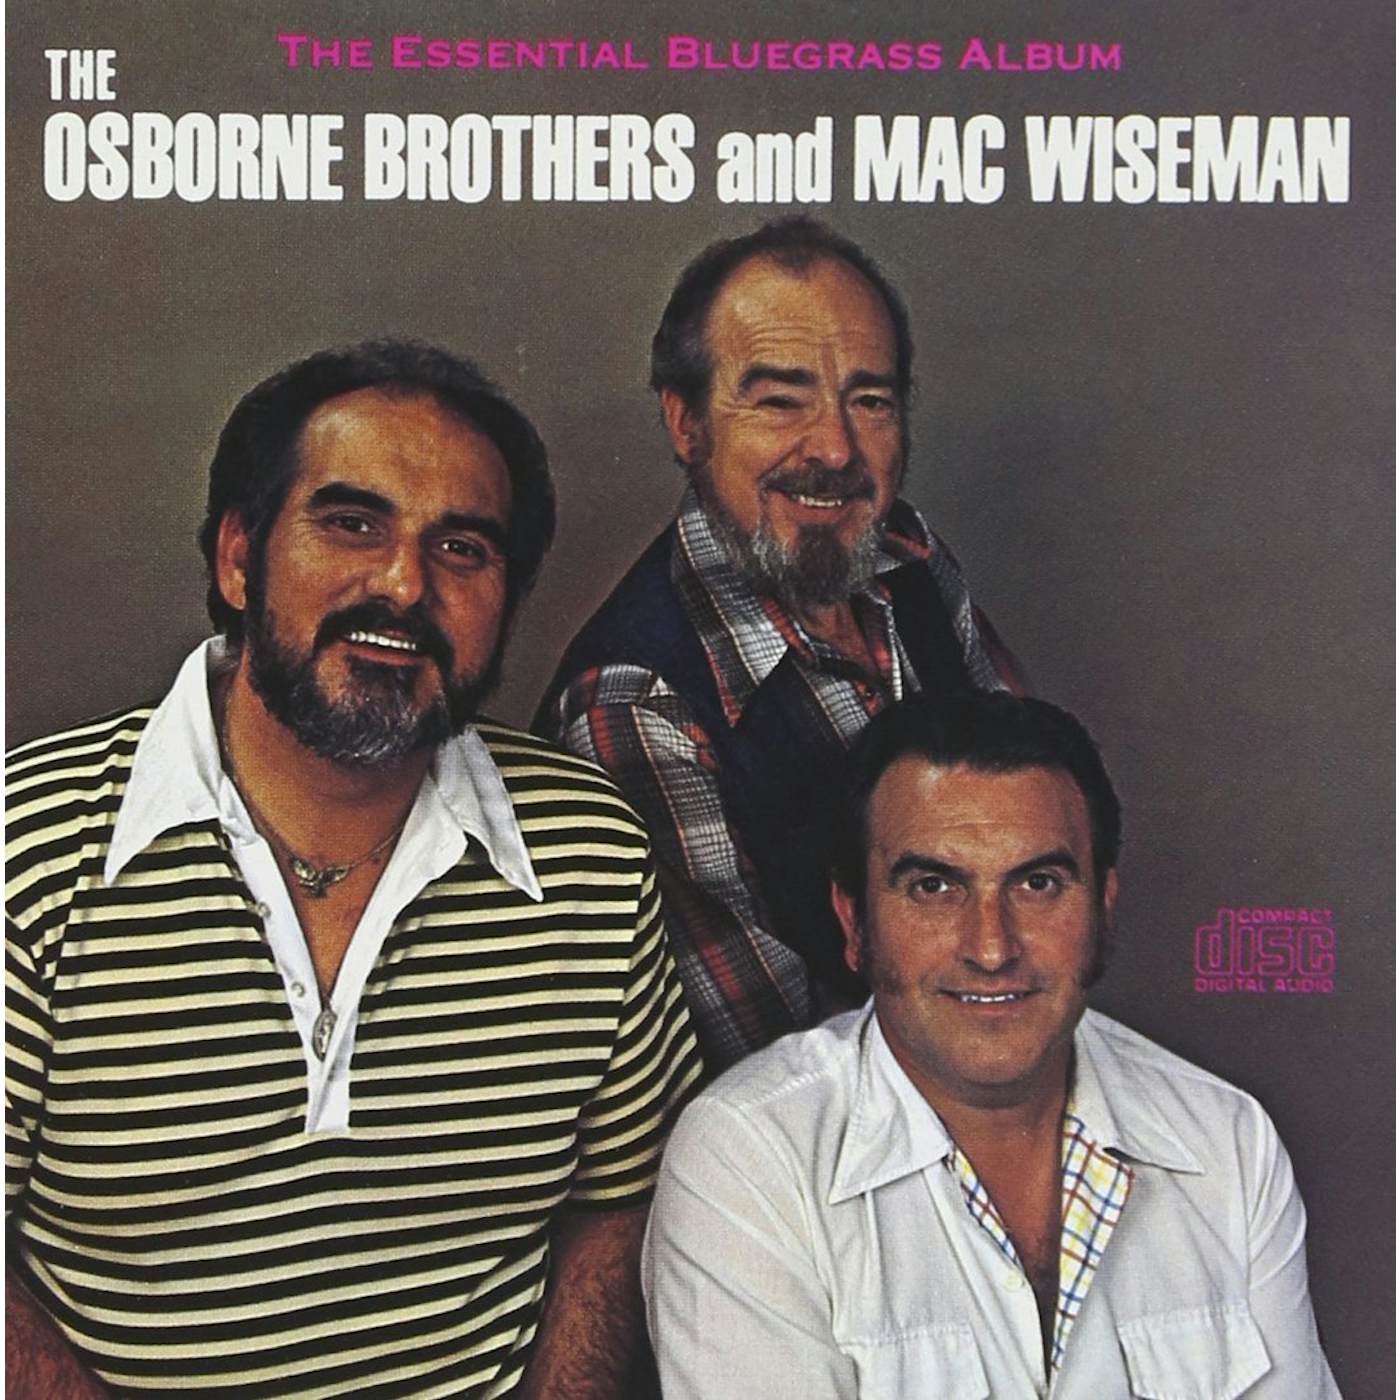 The Osborne Brothers and Mac Wiseman: The Essential Bluegrass Album